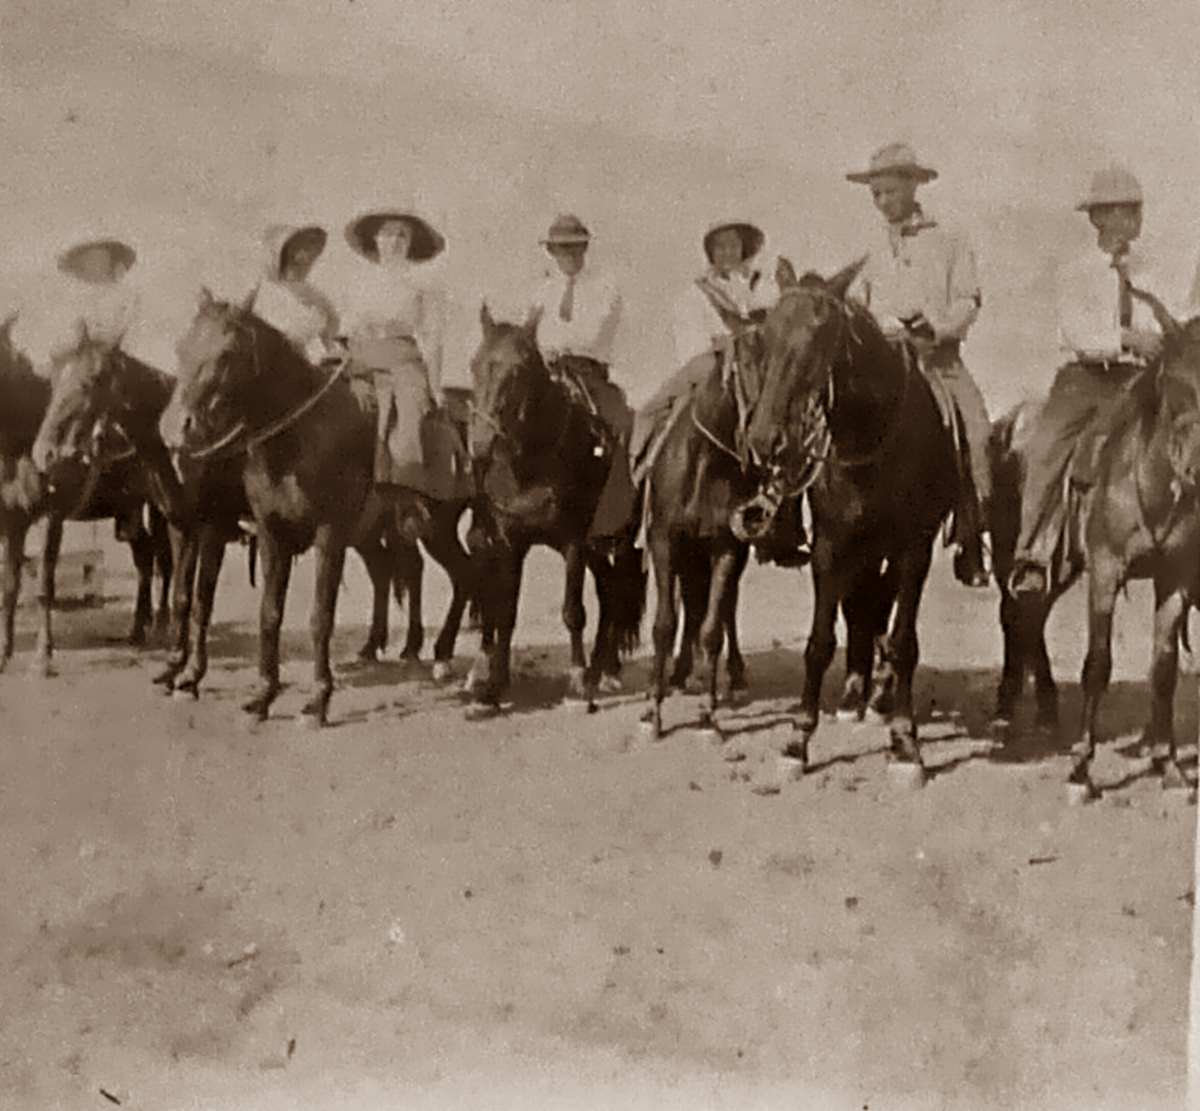 Cowgirls and Cowboys in Andrews Texas in Early 1900s